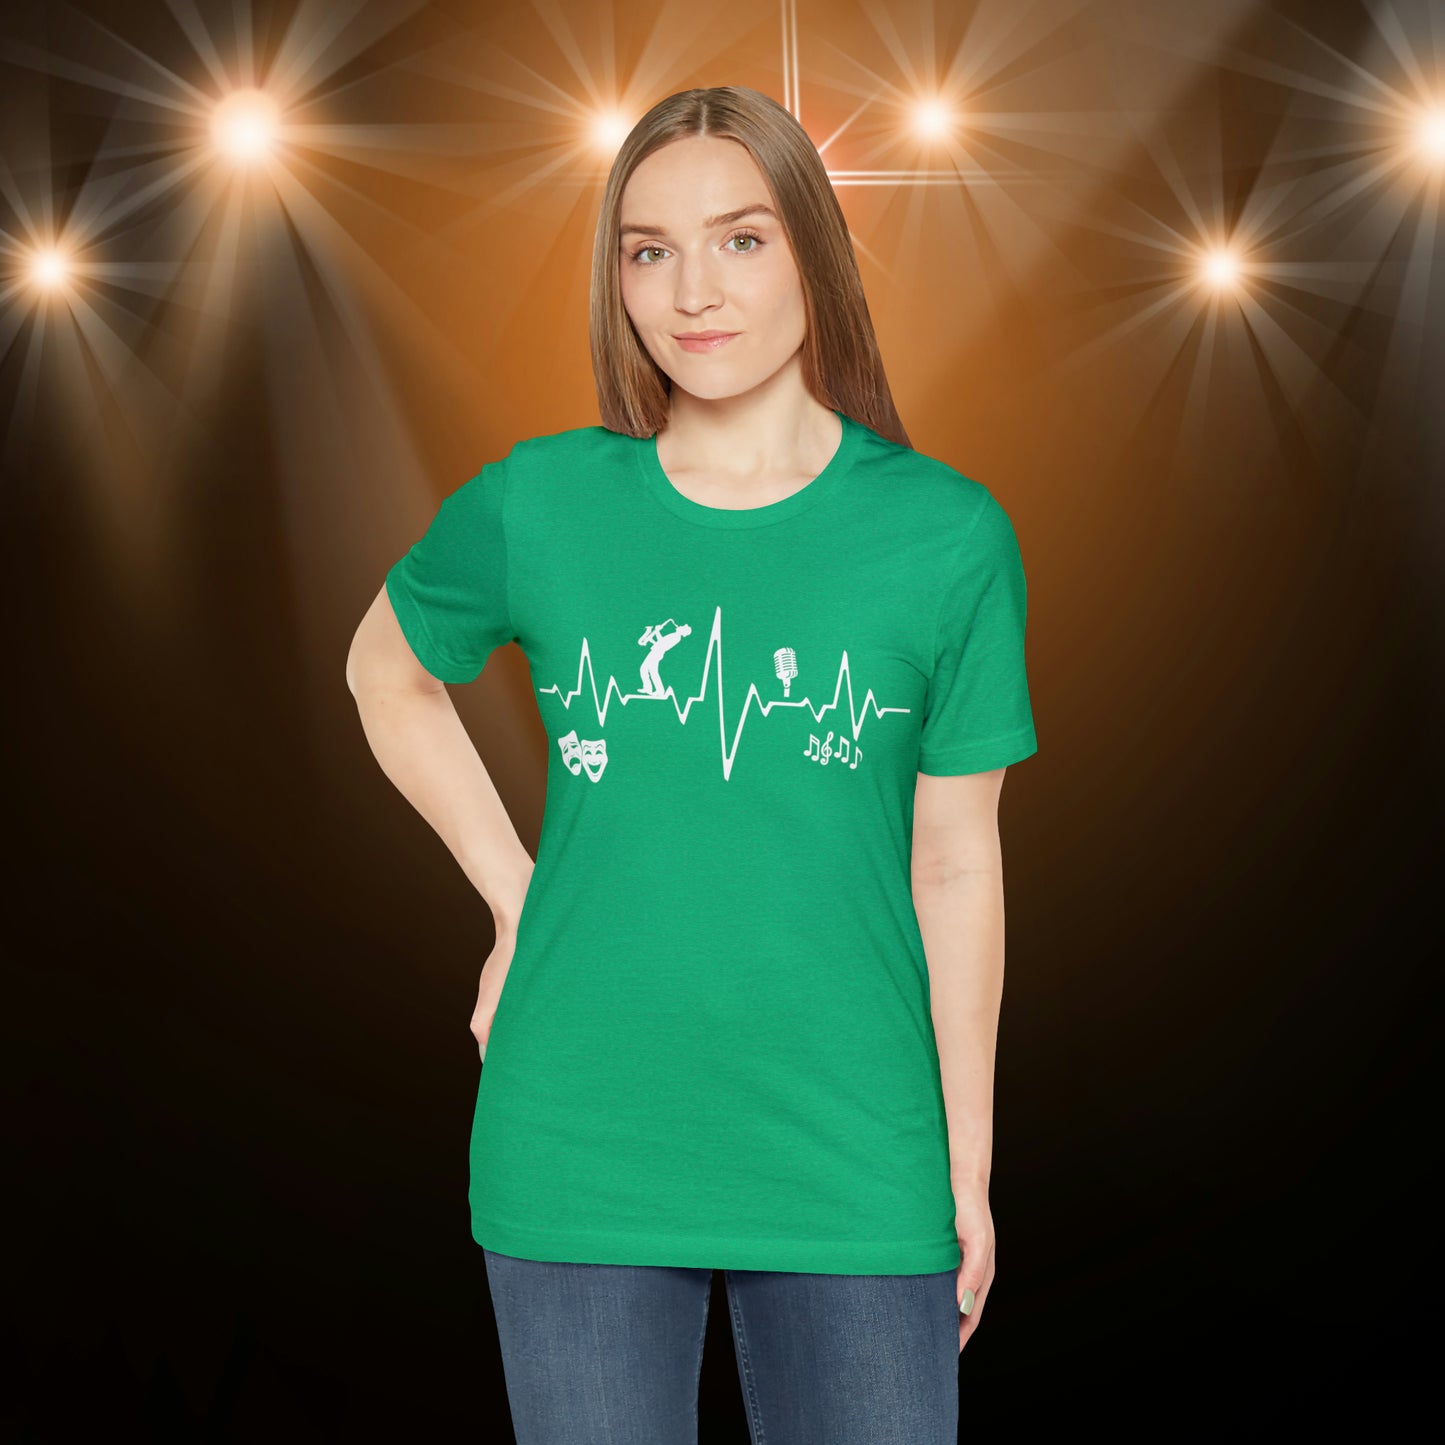 Beating Heart of Entertainment Unisex T-shirt - choice of 10 colors